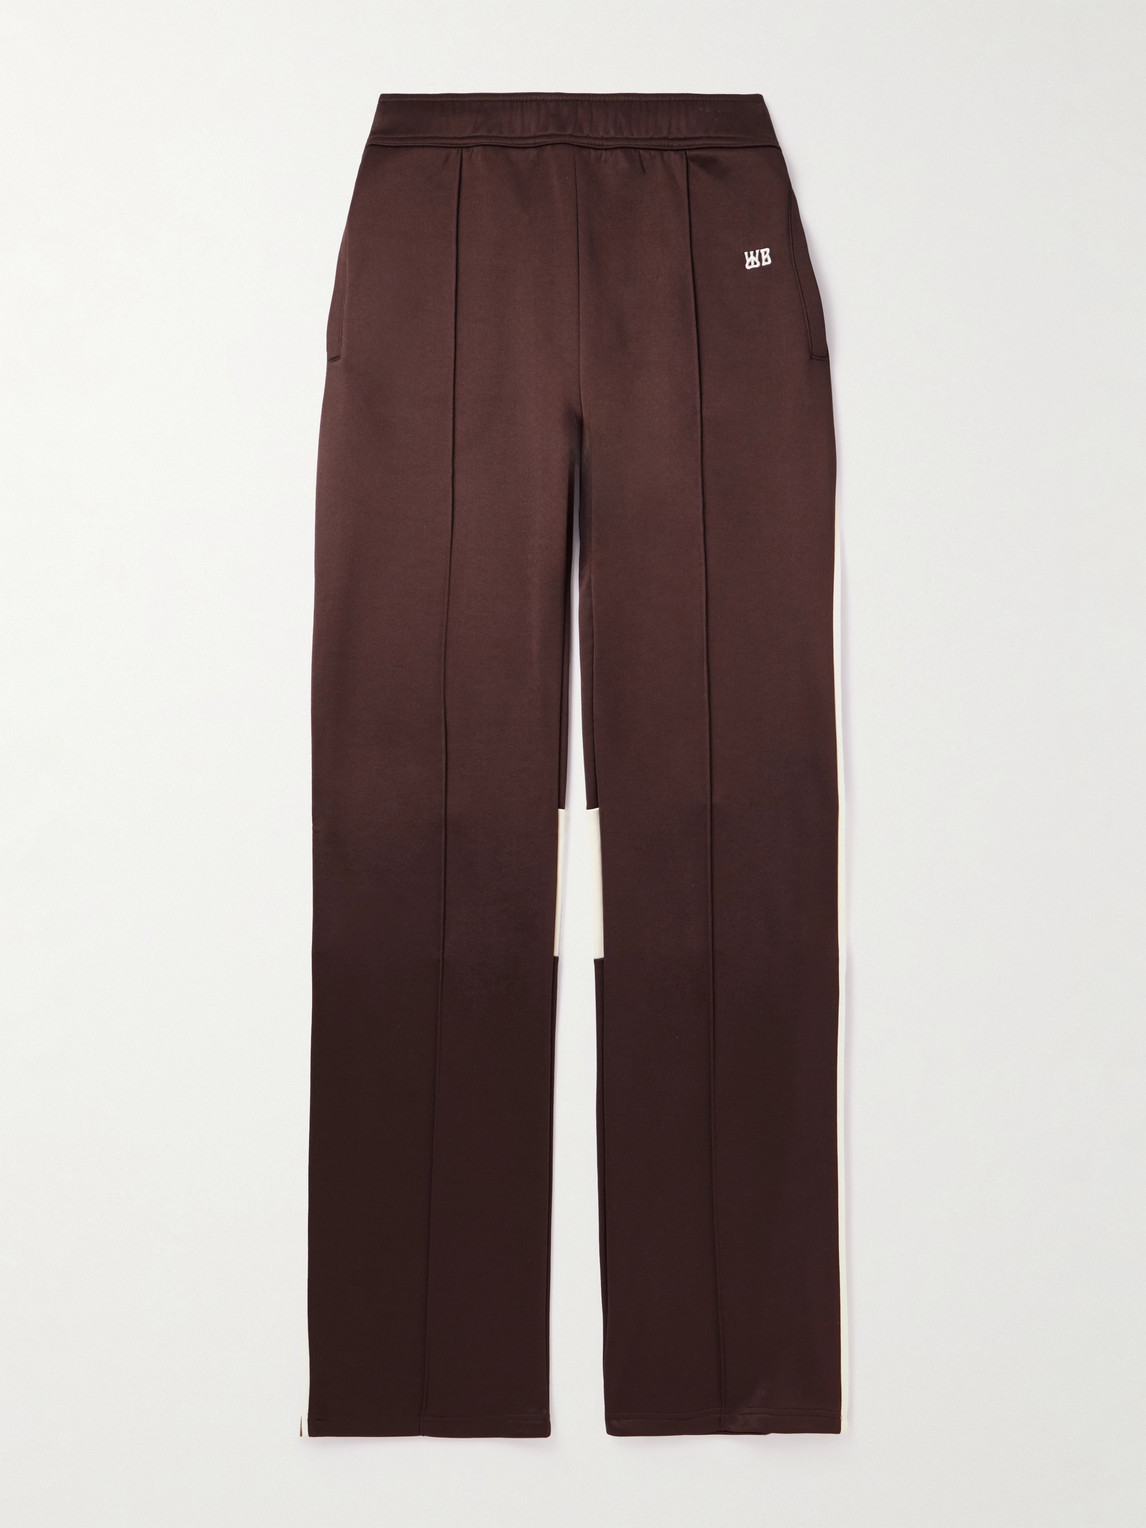 WALES BONNER Coltrane wool and cotton-blend drill flared pants